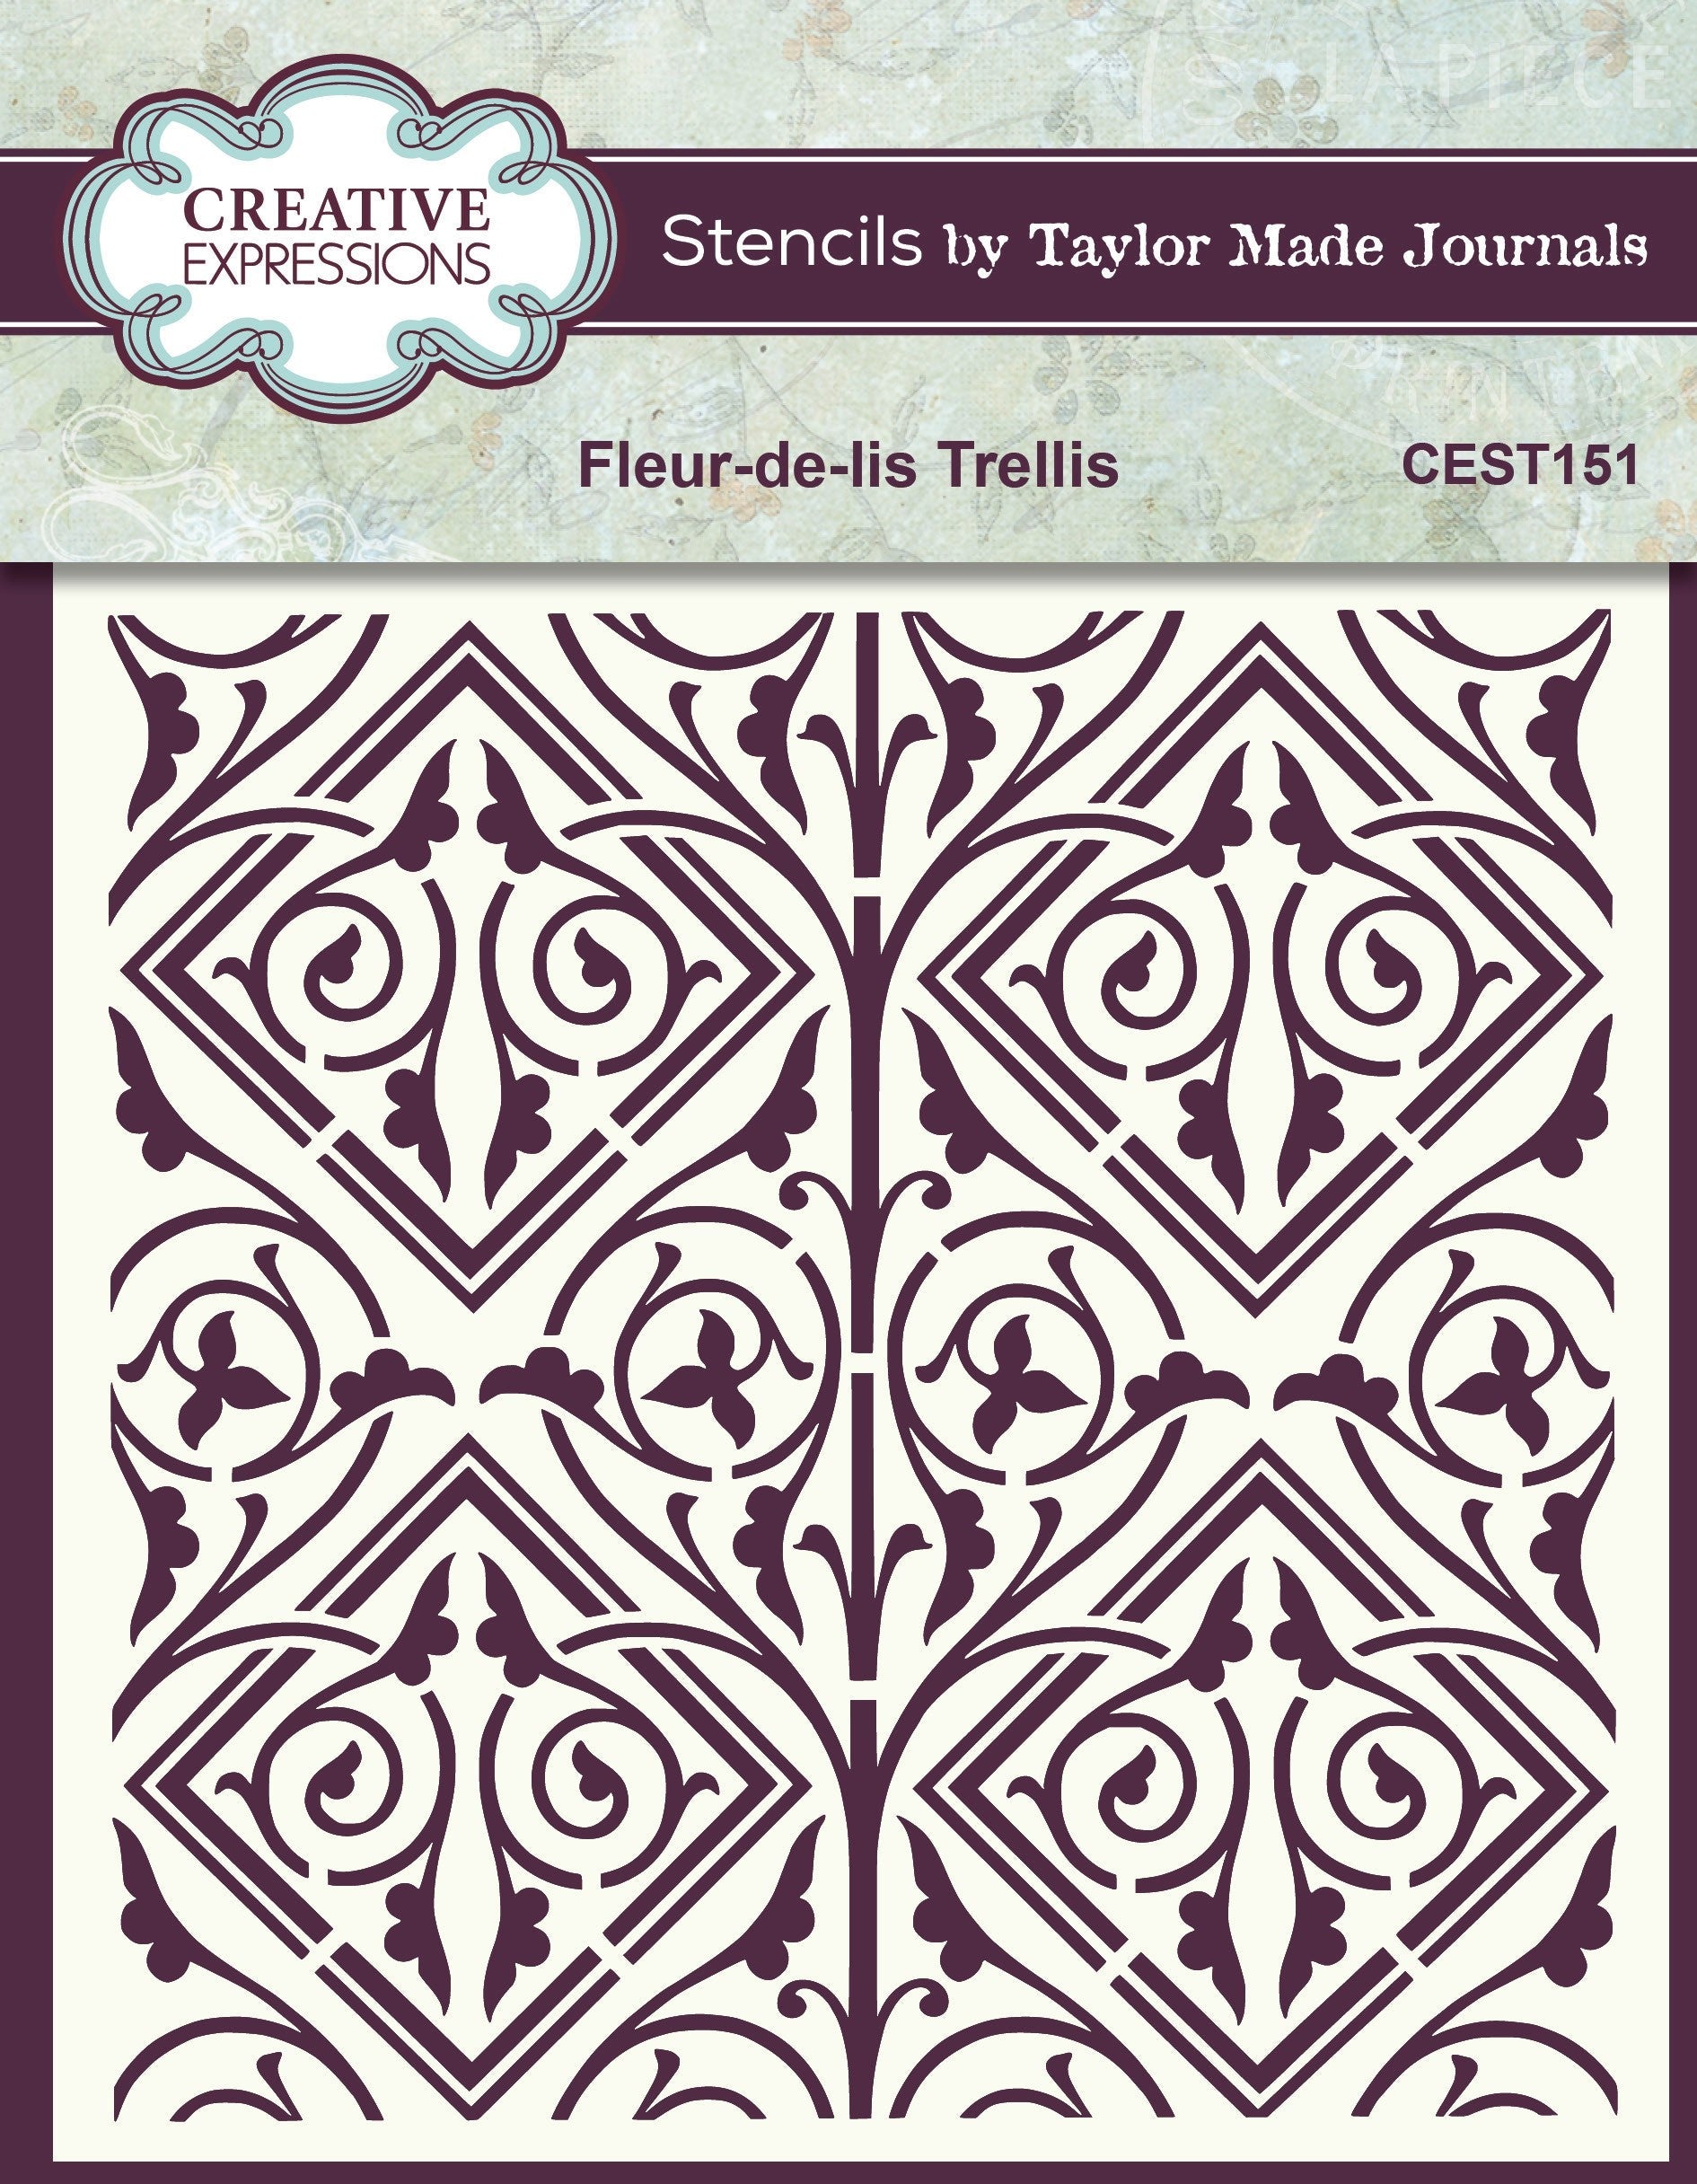 Creative Expressions Taylor Made Journals Fleur-de-lis Trellis 6 in x 6 in Stencil